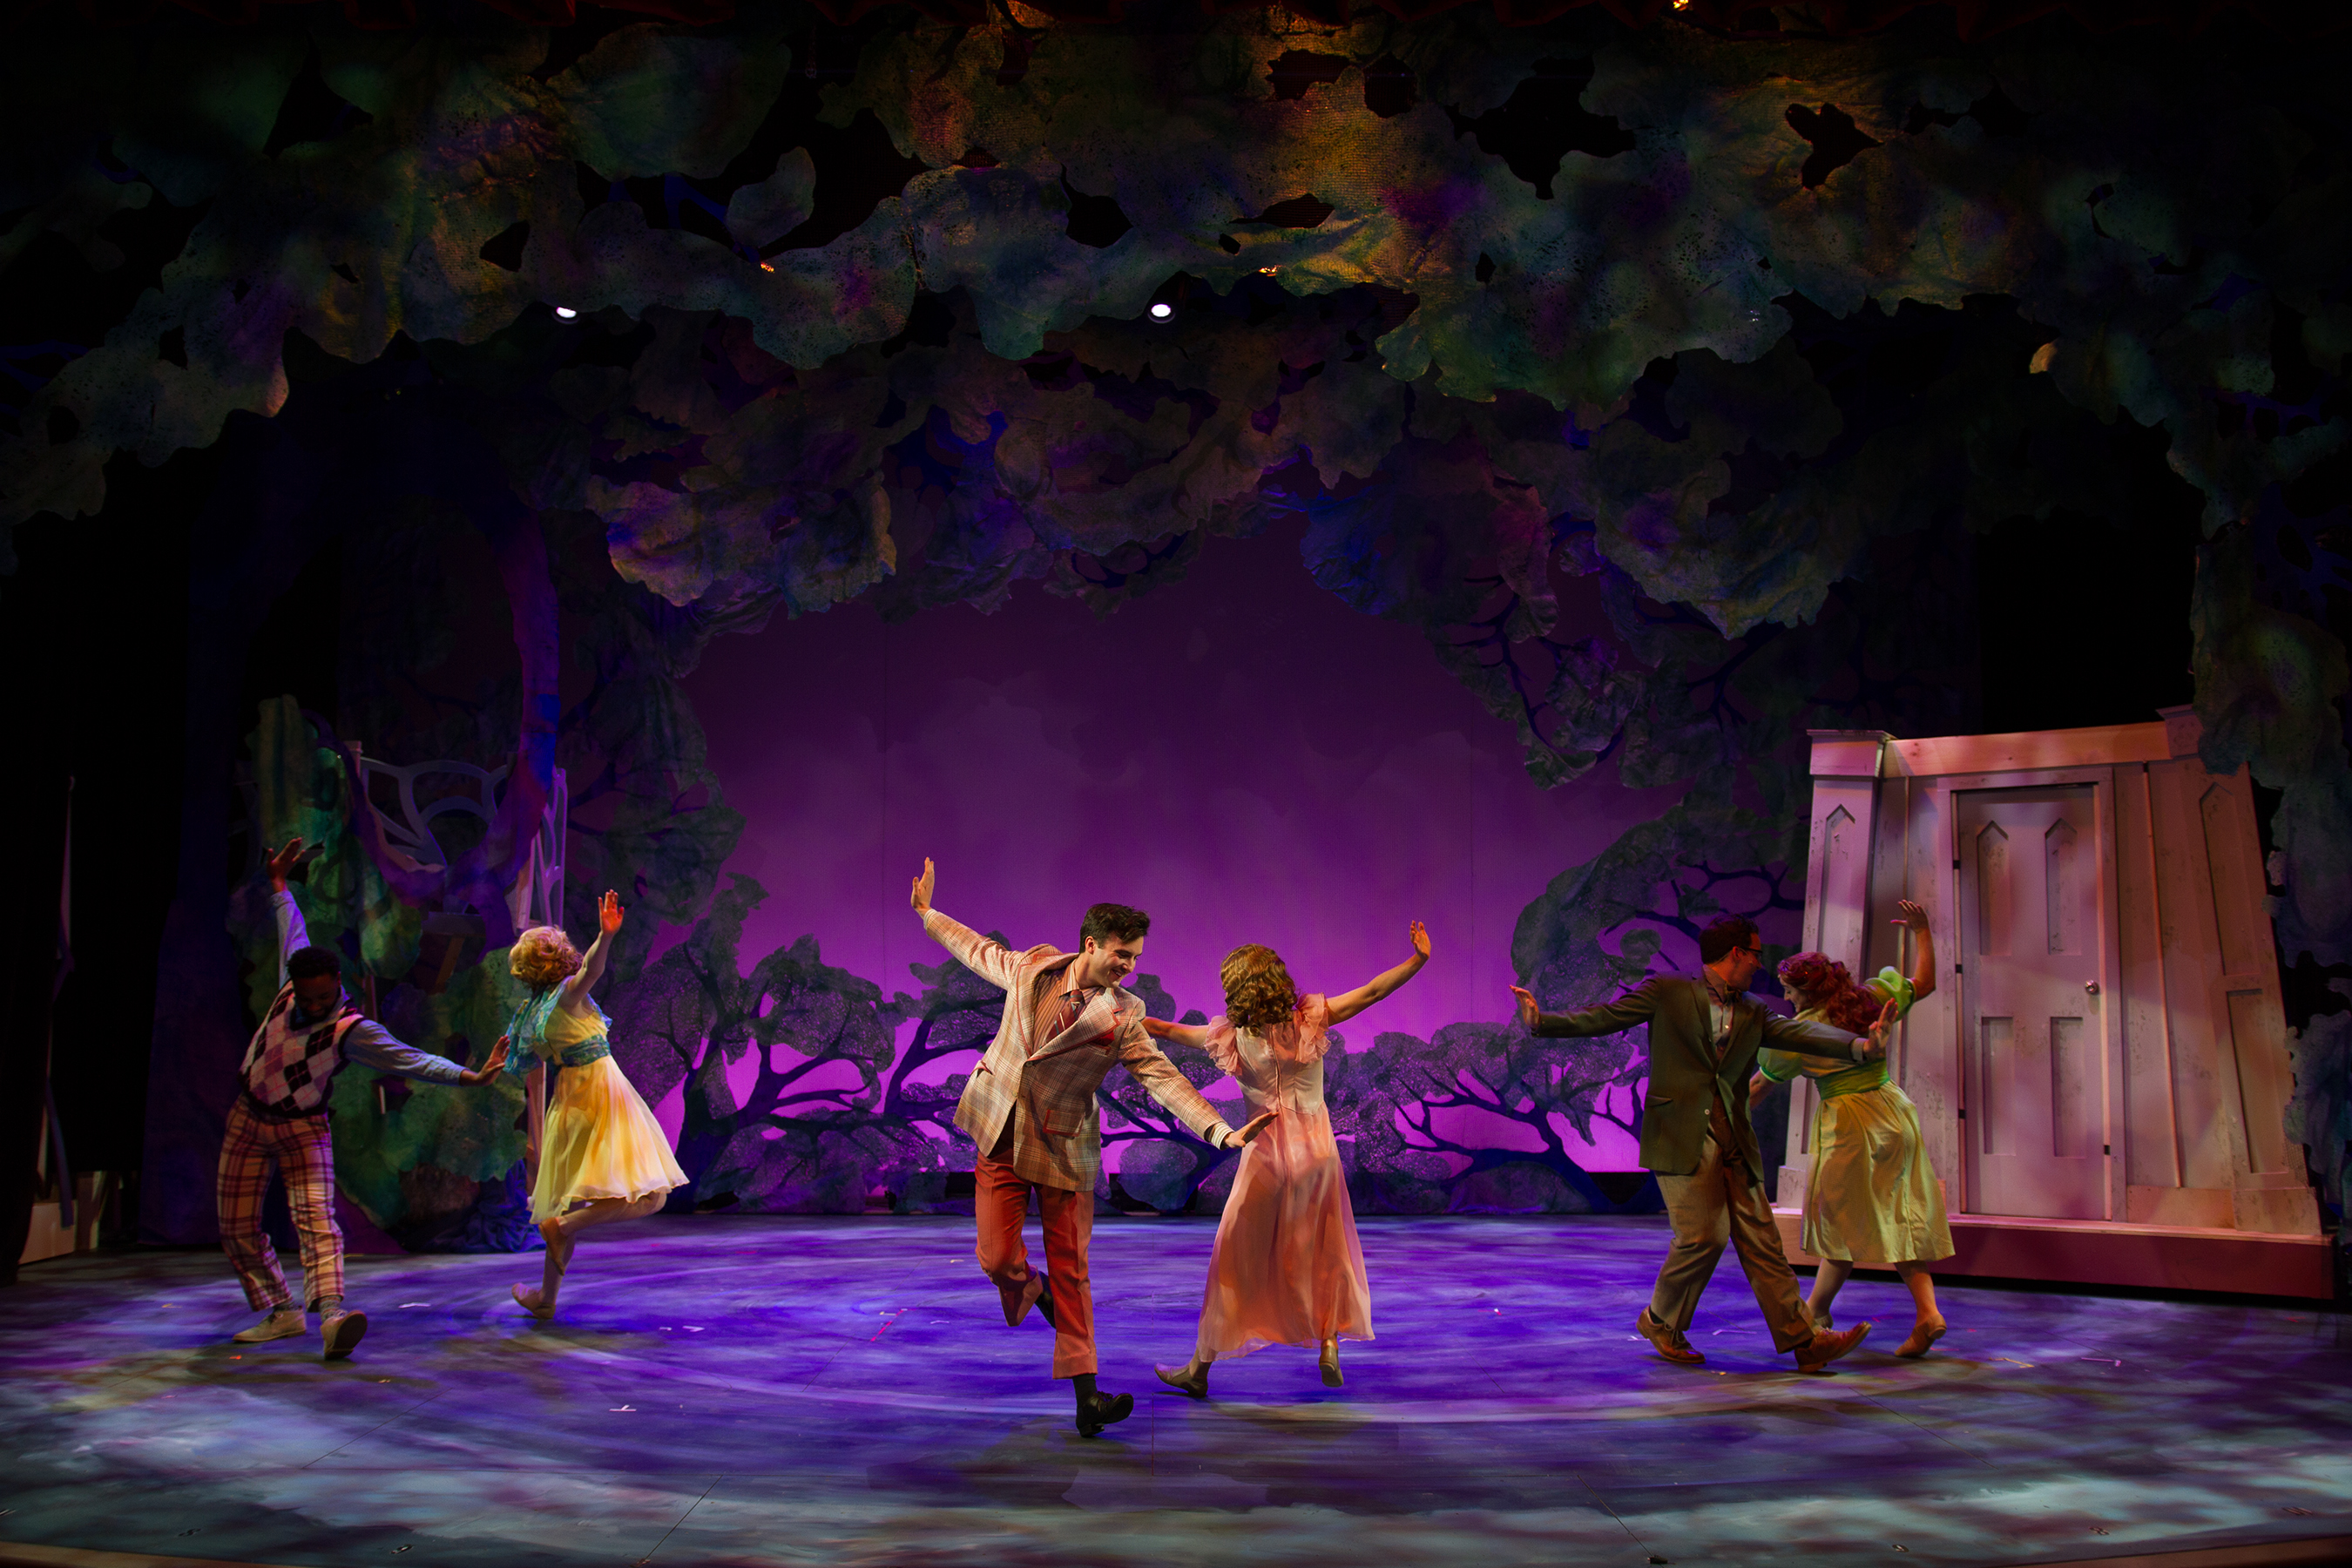 Tuck everlasting is a magical, musical adventure based on the classic children's book by Natalie Babbitt. (Photo by Gillian Mariner Gordon)